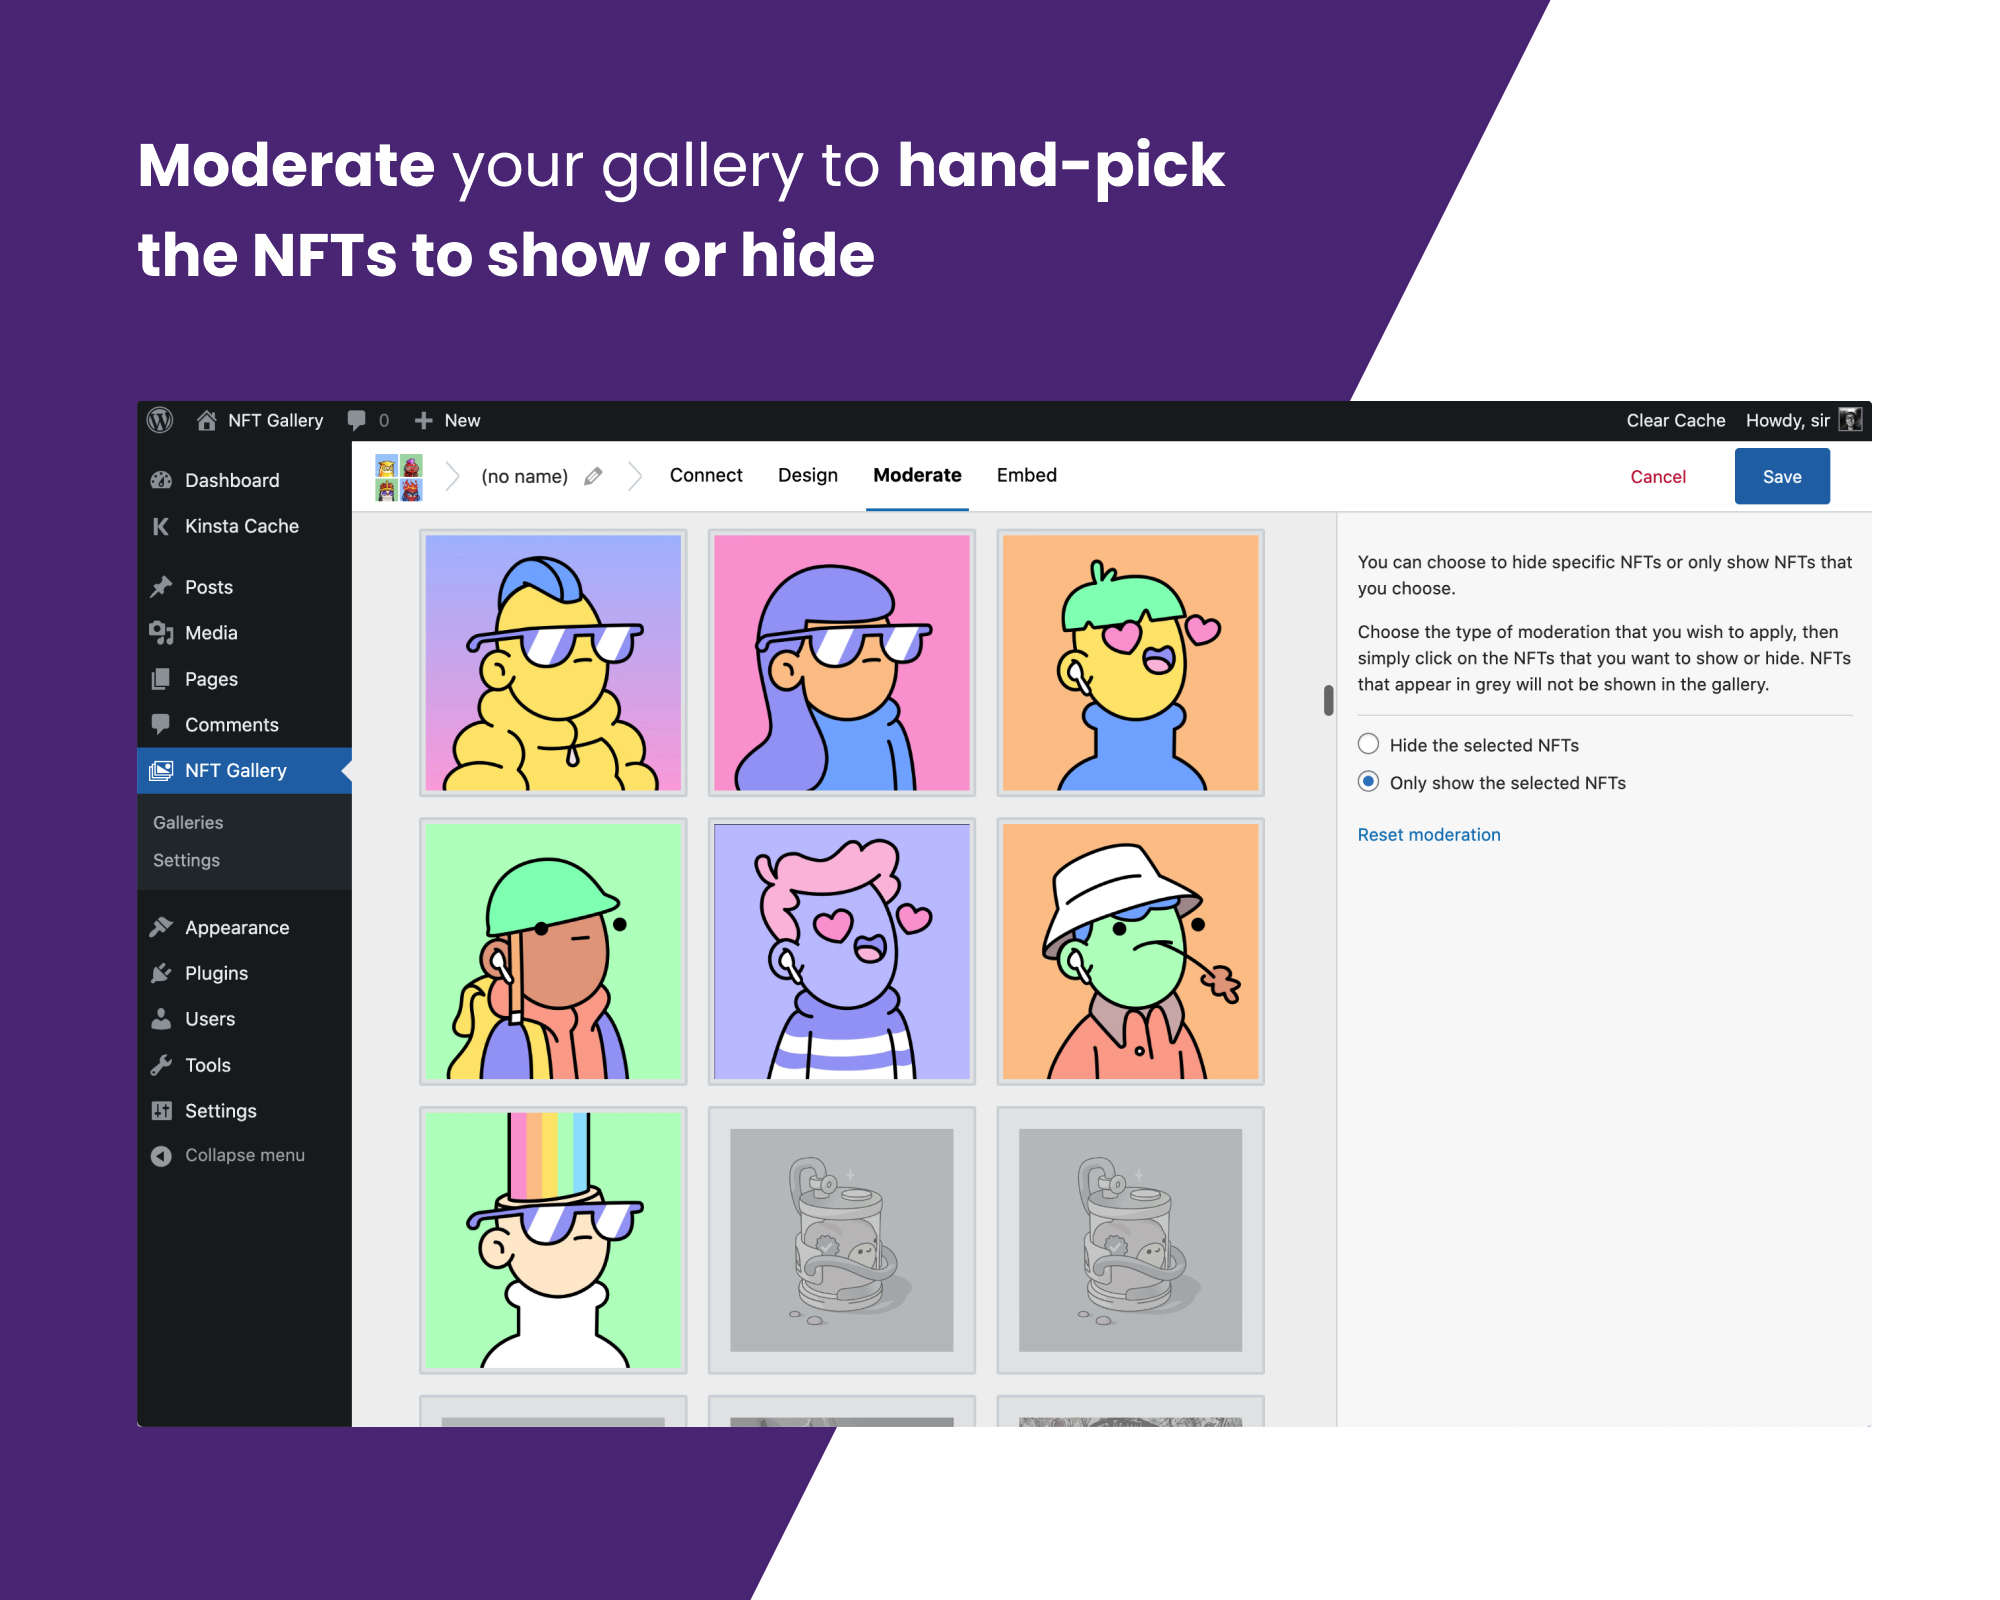 Moderate your gallery to hand-pick the NFTs to show or hide in each gallery.